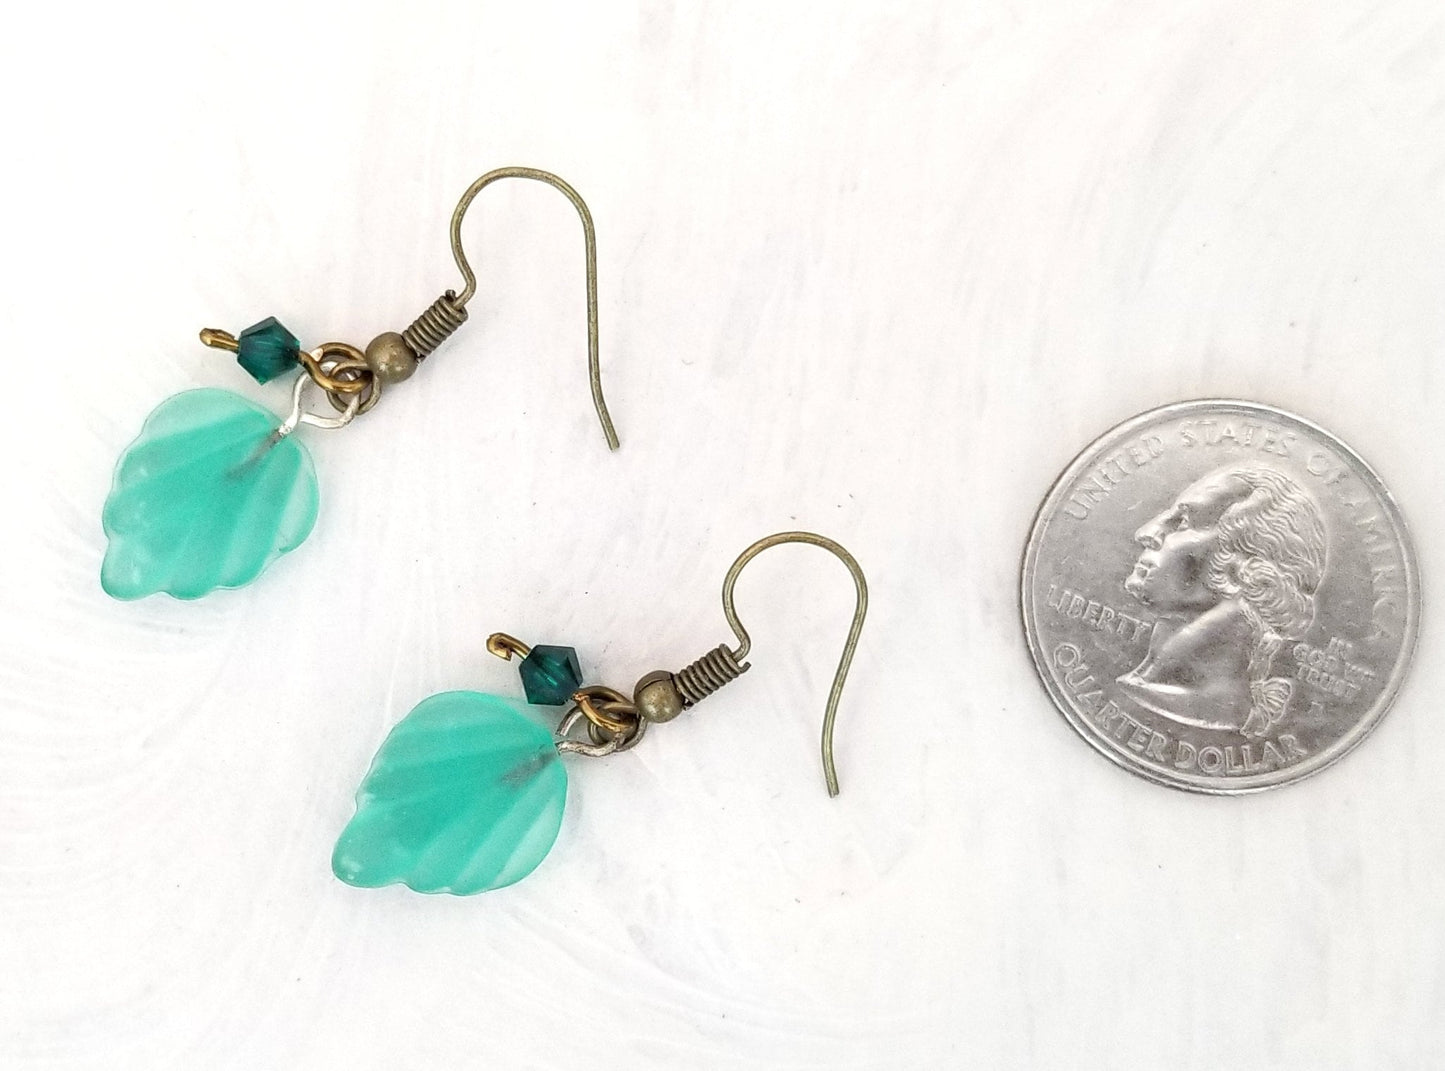 Small Glass Leaf Earrings in Frosted Aqua Blue Green, Wedding, Bridesmaid, Art Nouveau, Renaissance, Forest, Choice of Closure Types